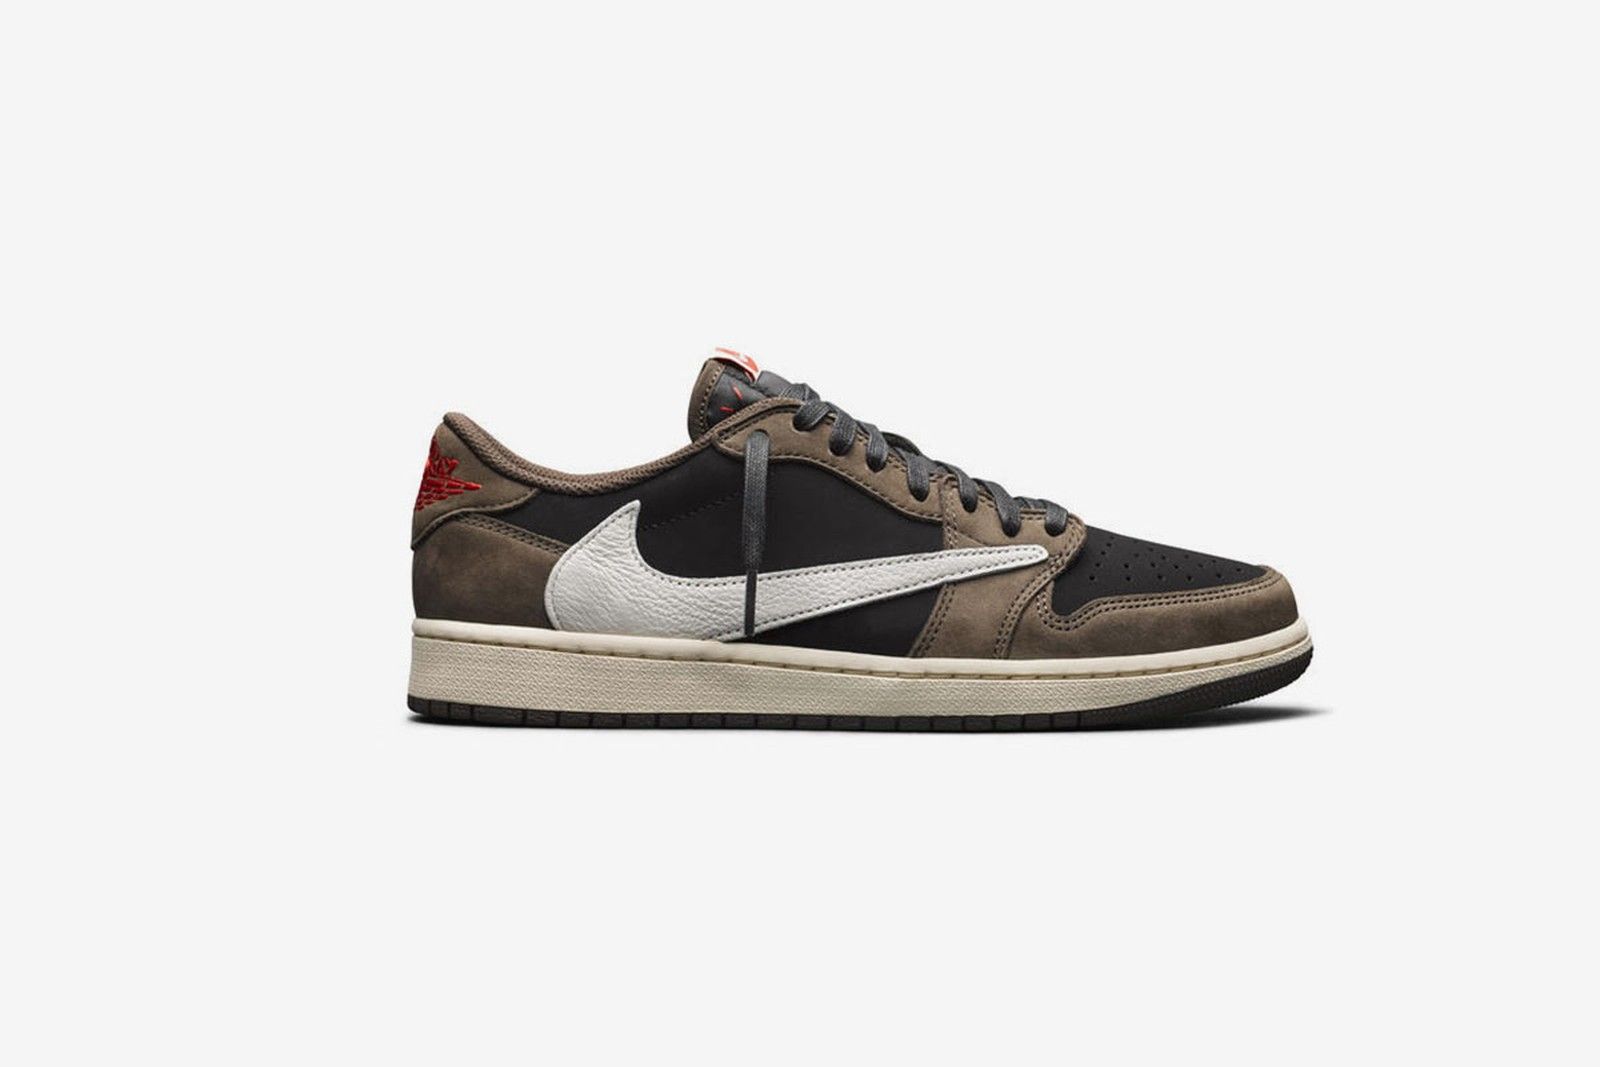 The Most Valuable Travis Scott Sneakers Ever Released - Sneaker 